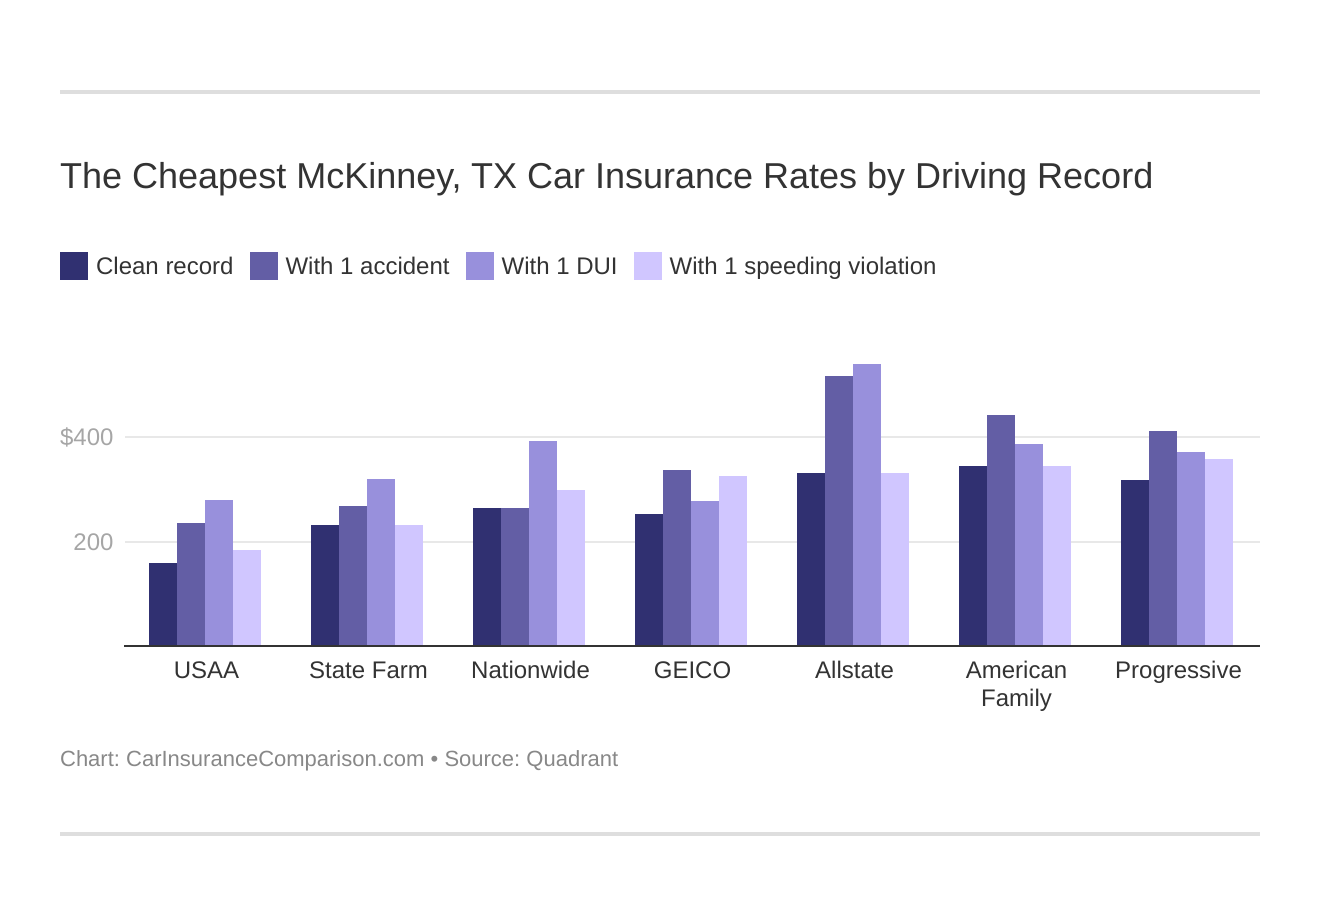 The Cheapest McKinney, TX Car Insurance Rates by Driving Record